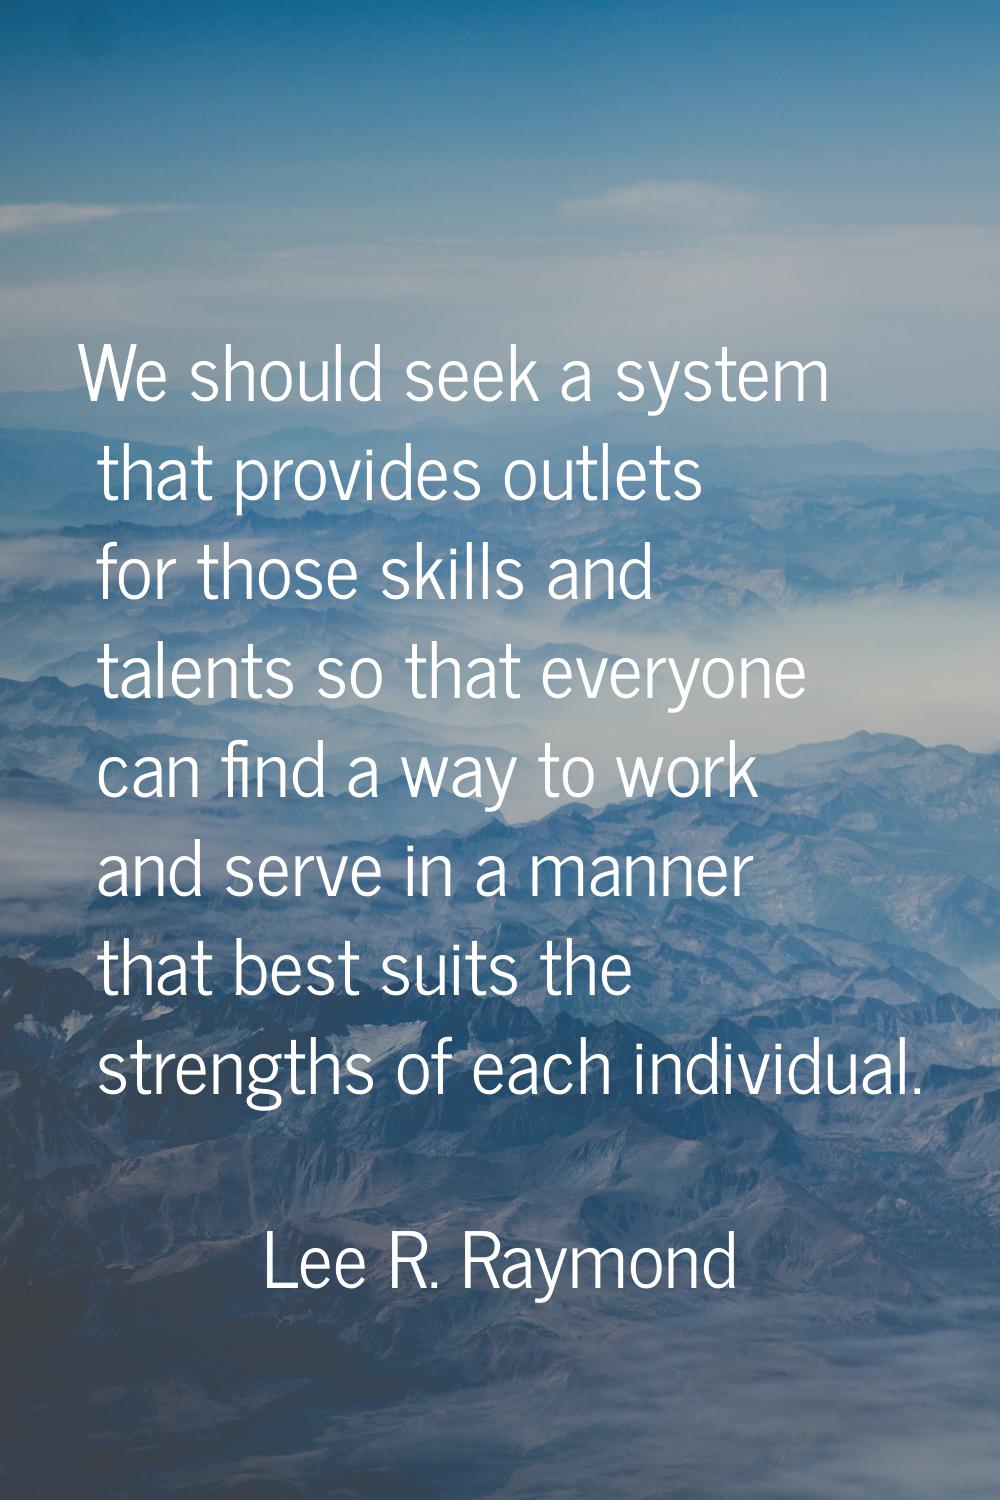 We should seek a system that provides outlets for those skills and talents so that everyone can fin